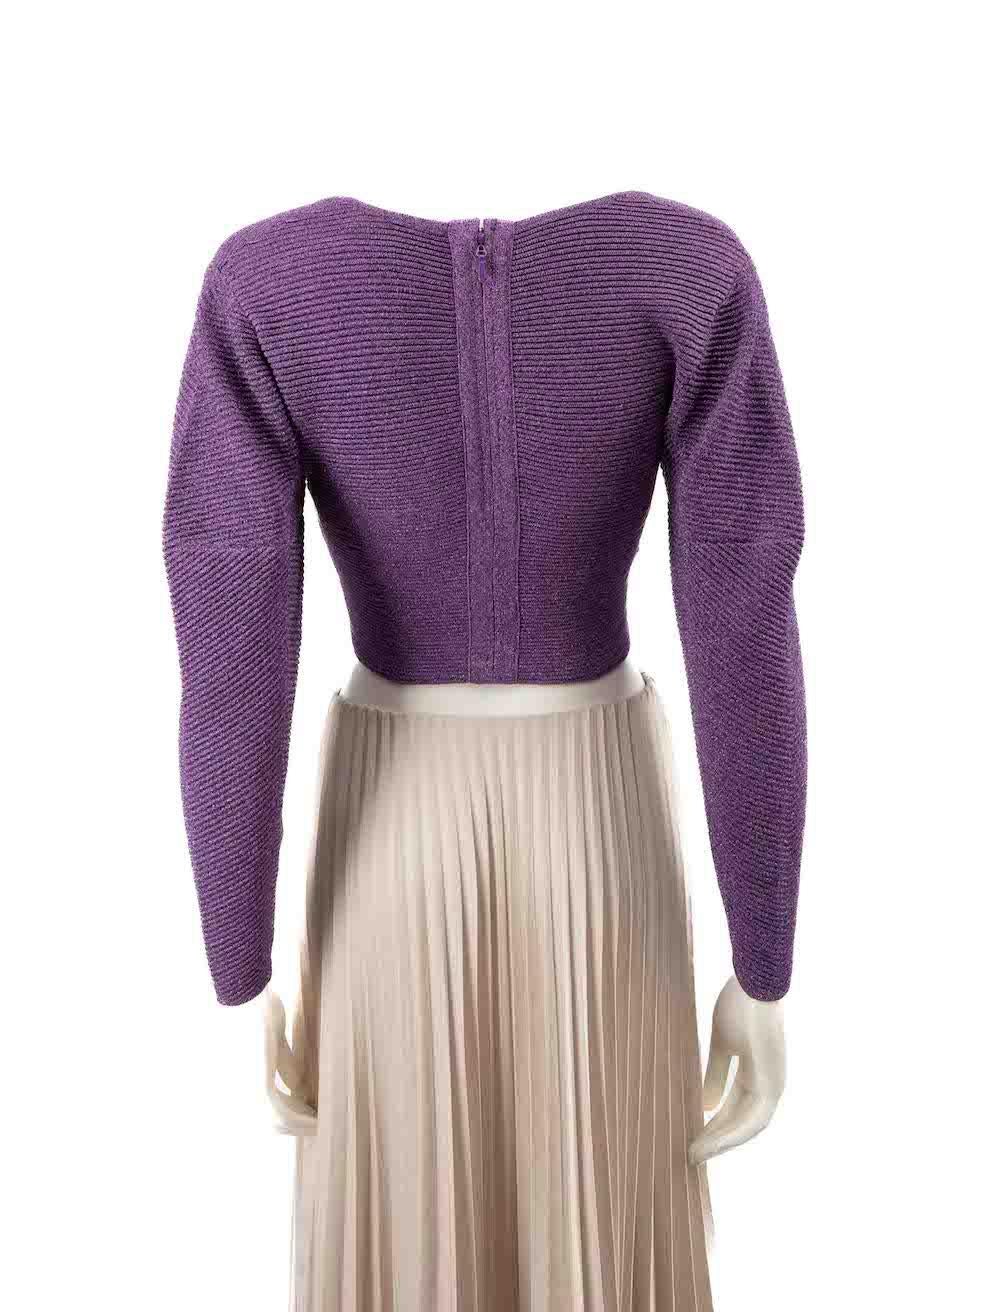 Herve Leger Purple Metallic Sweetheart Neck Top Size XS In Good Condition For Sale In London, GB